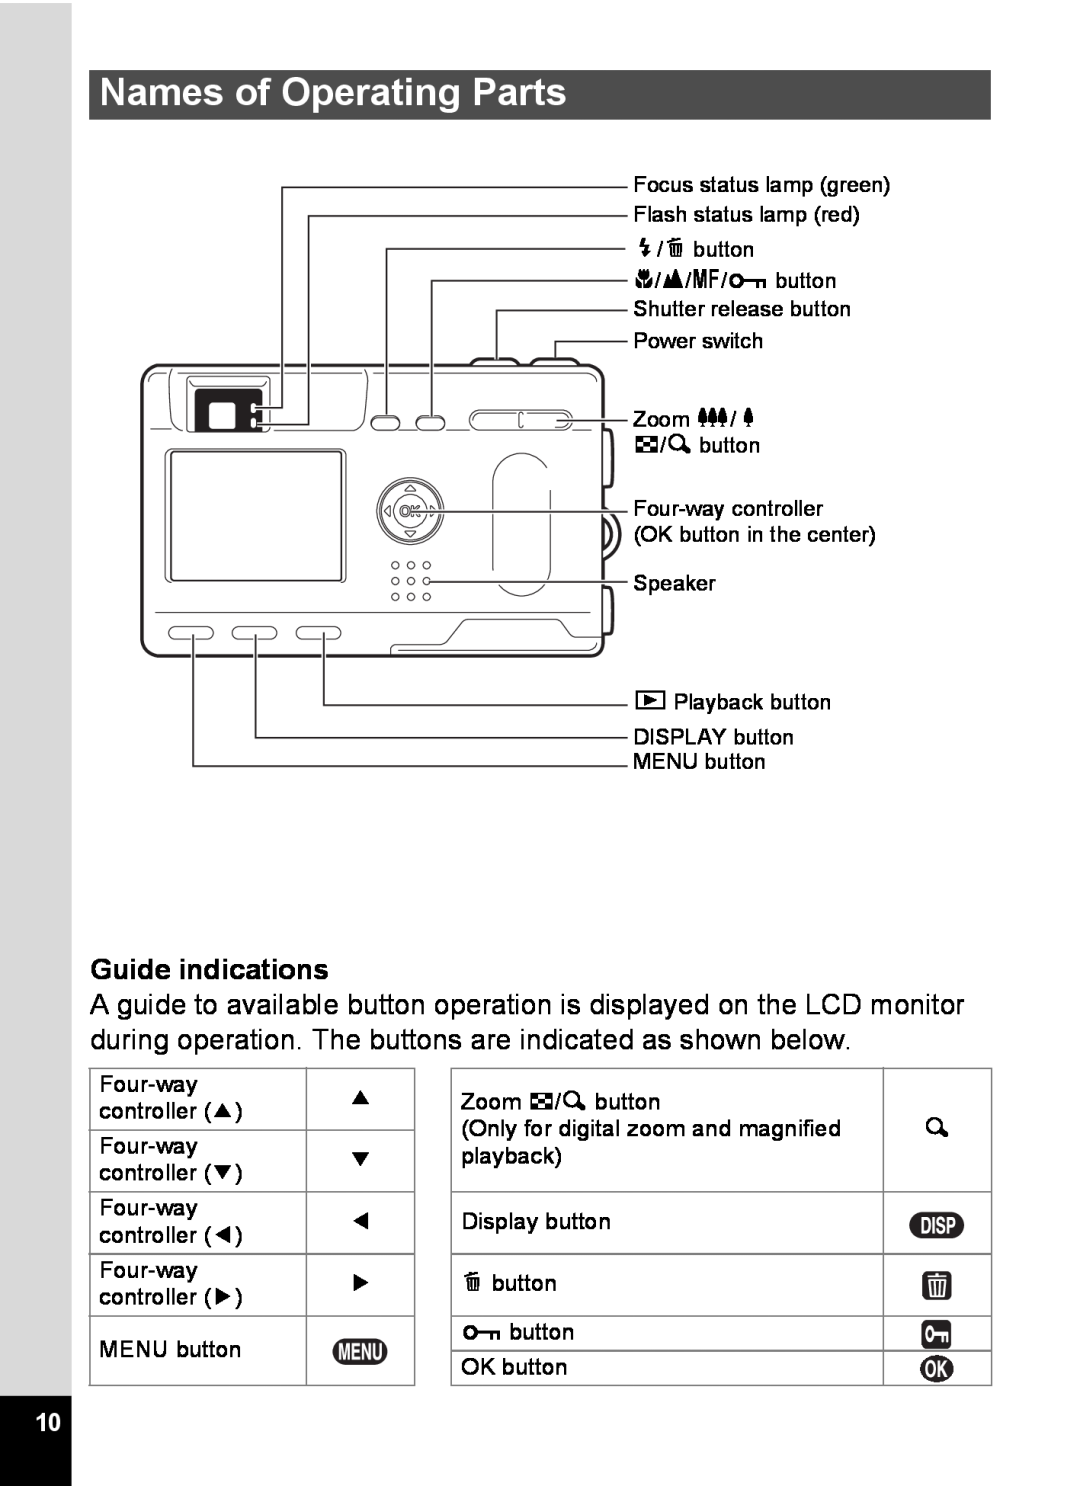 Pentax S4 manual Names of Operating Parts, Guide indications 